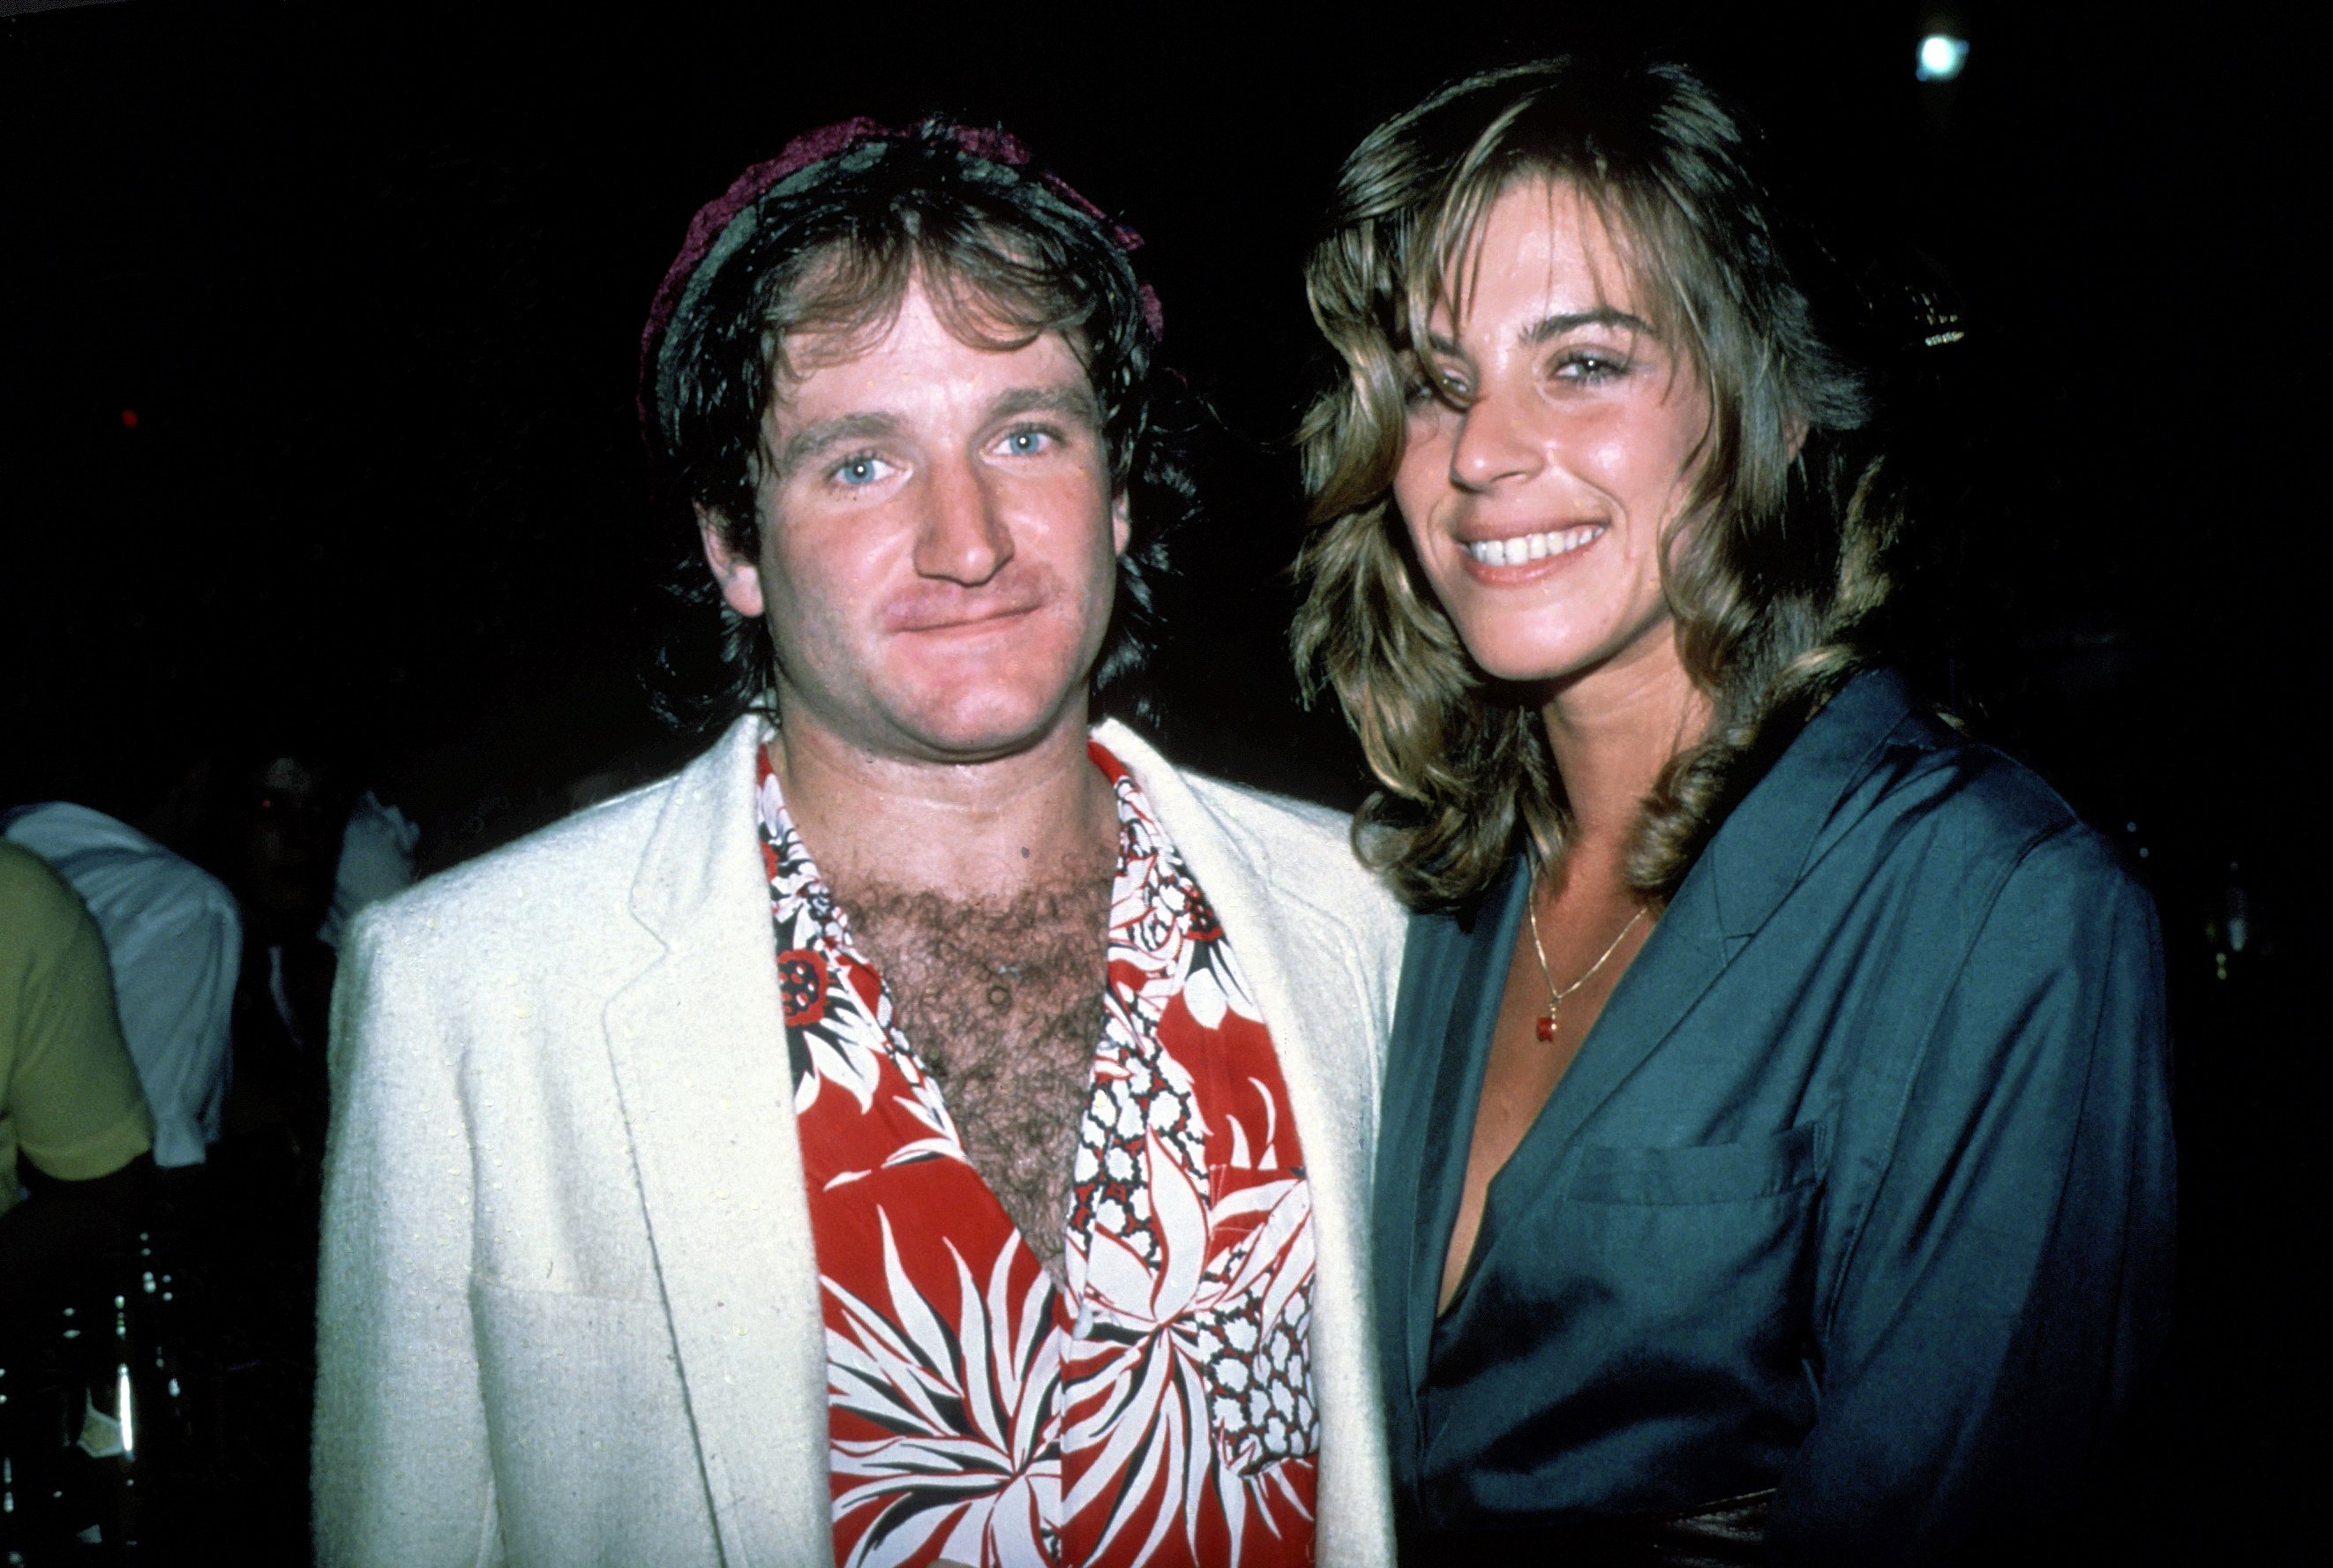 Robin Williams and his wife Valerie Velardi circa 1979 in New York | Source: Getty Images